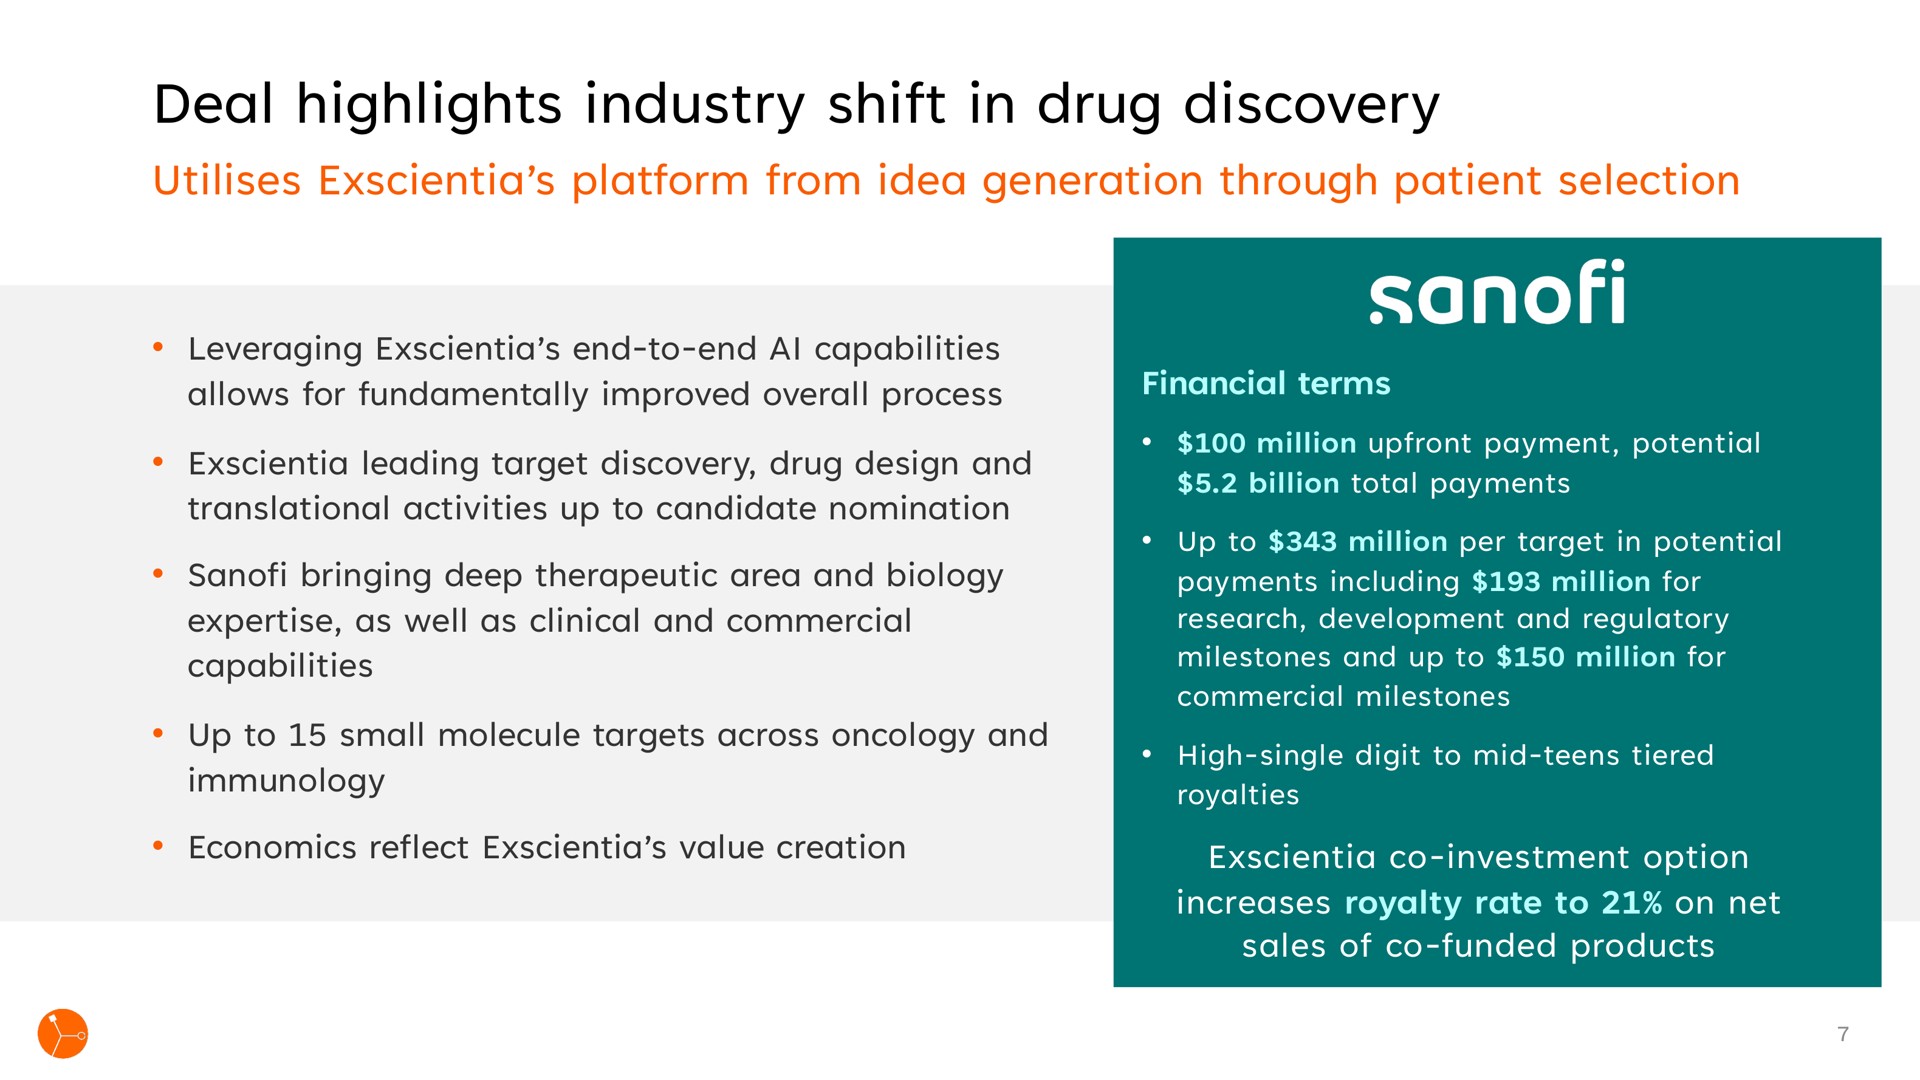 deal highlights industry shift in drug discovery | Exscientia